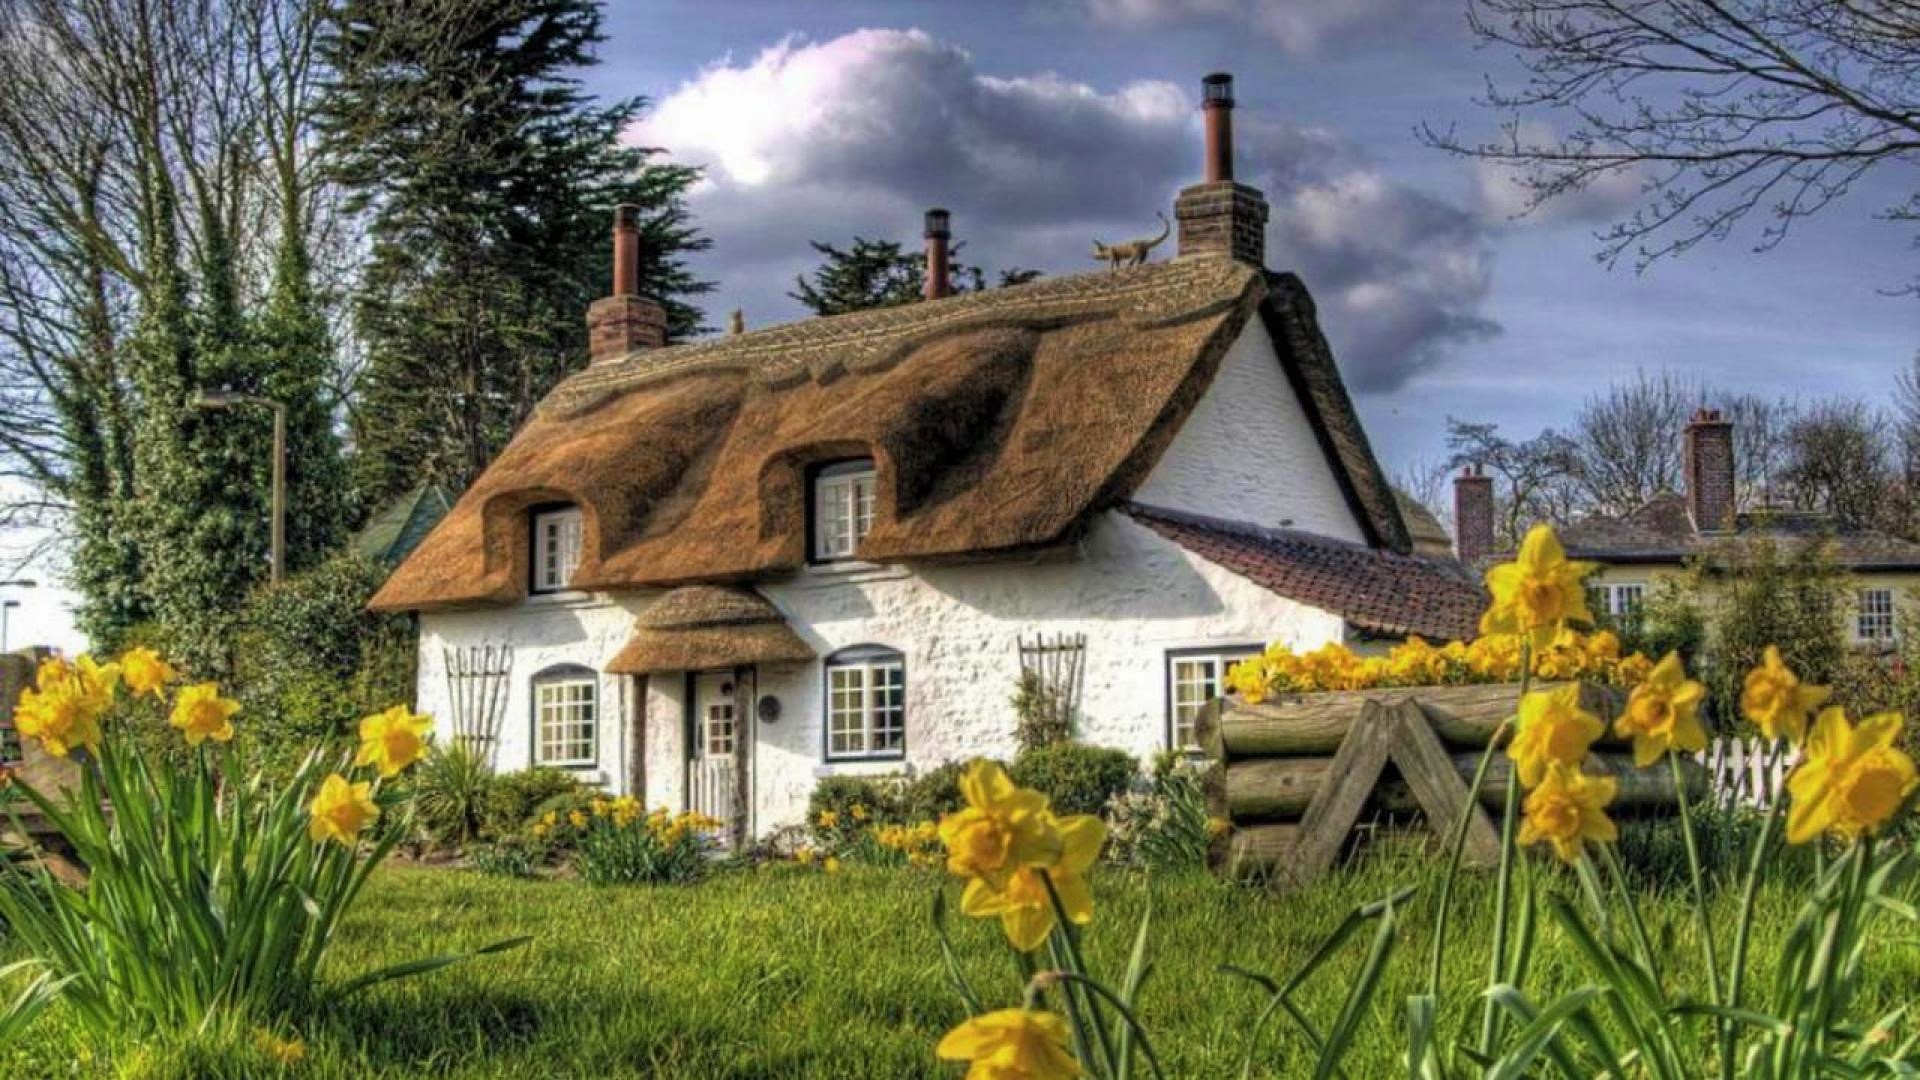 england, man made, cottage, country, flower, house Image for desktop